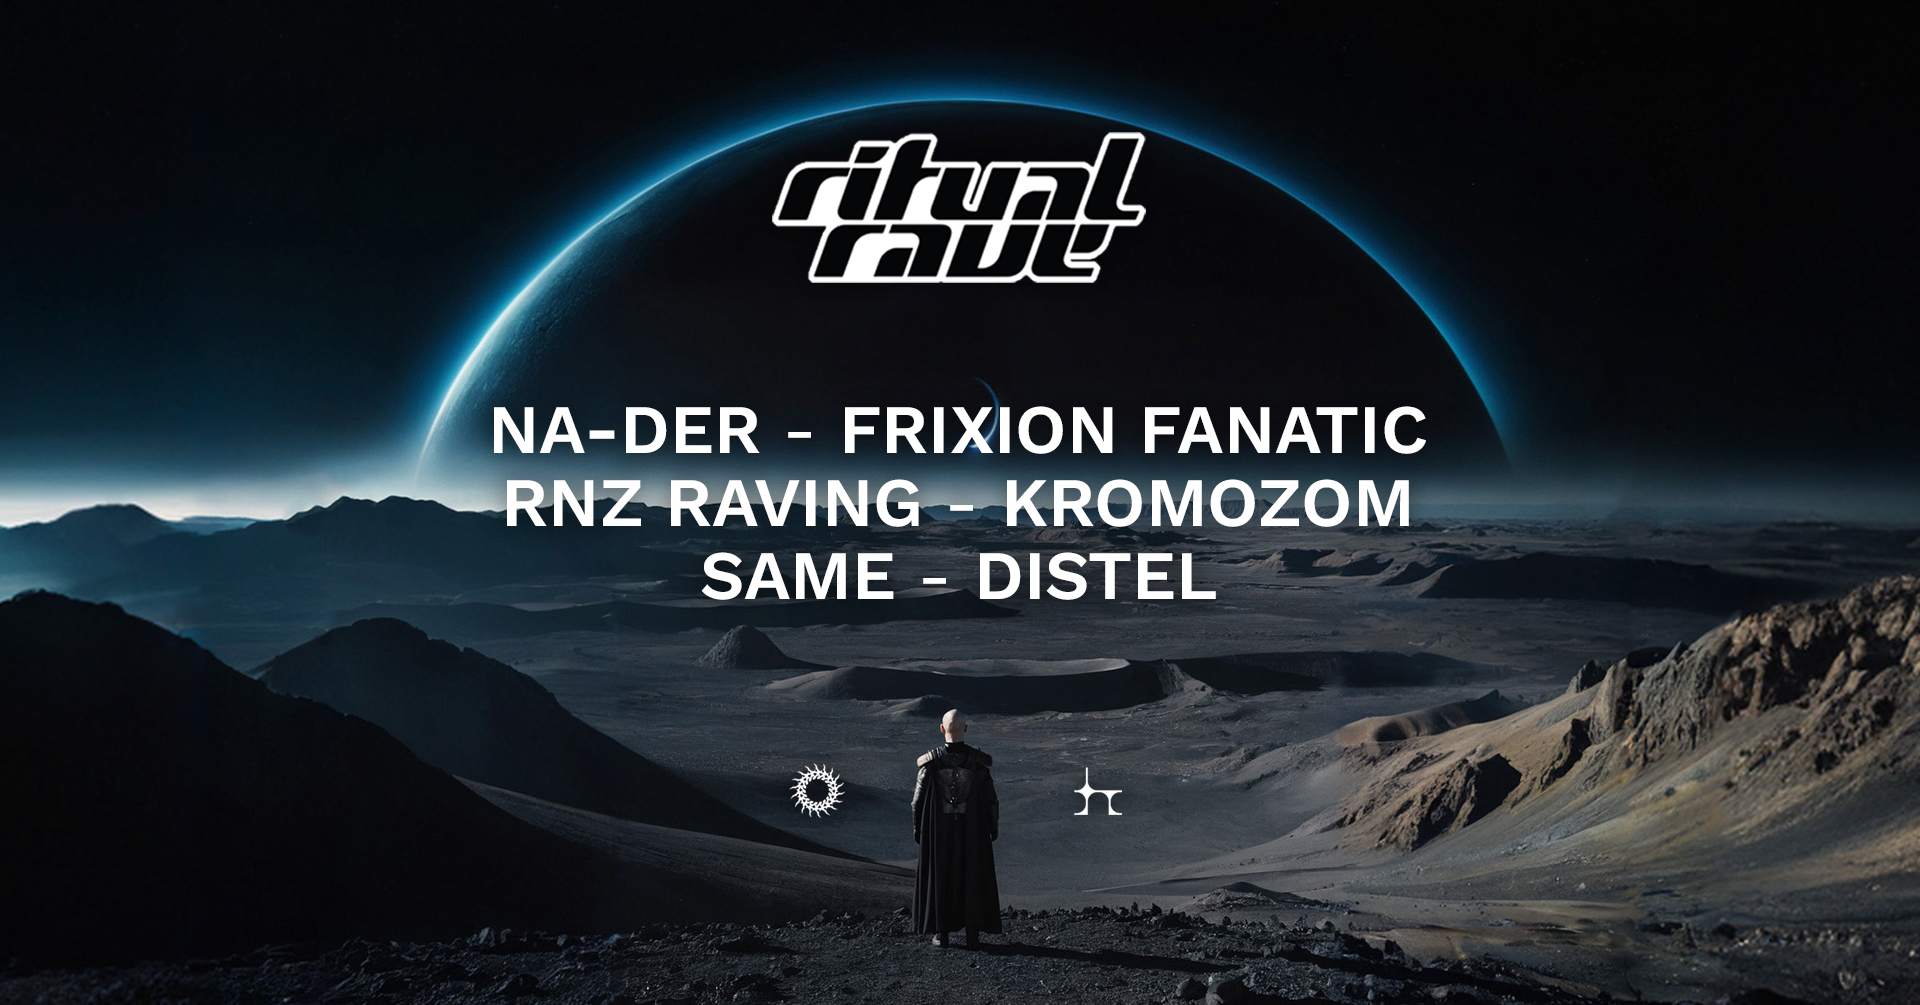 Ritual Rave: Lunar Labyrinth with Na-Der, Frixion Fanatic, RNZ Raving - フライヤー表